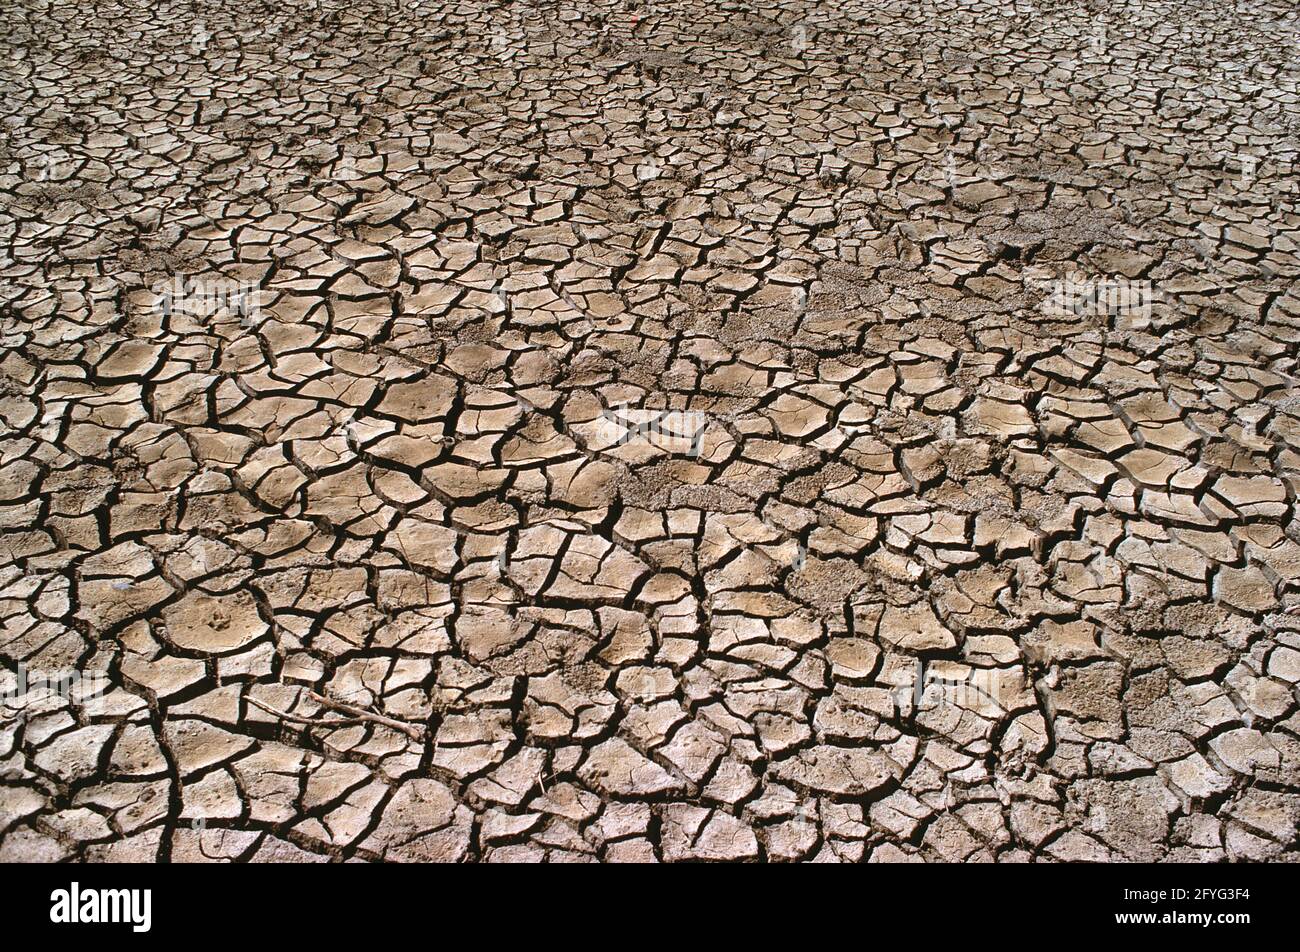 Australia. New South Wales. Drought. Parched cracked ground. Stock Photo